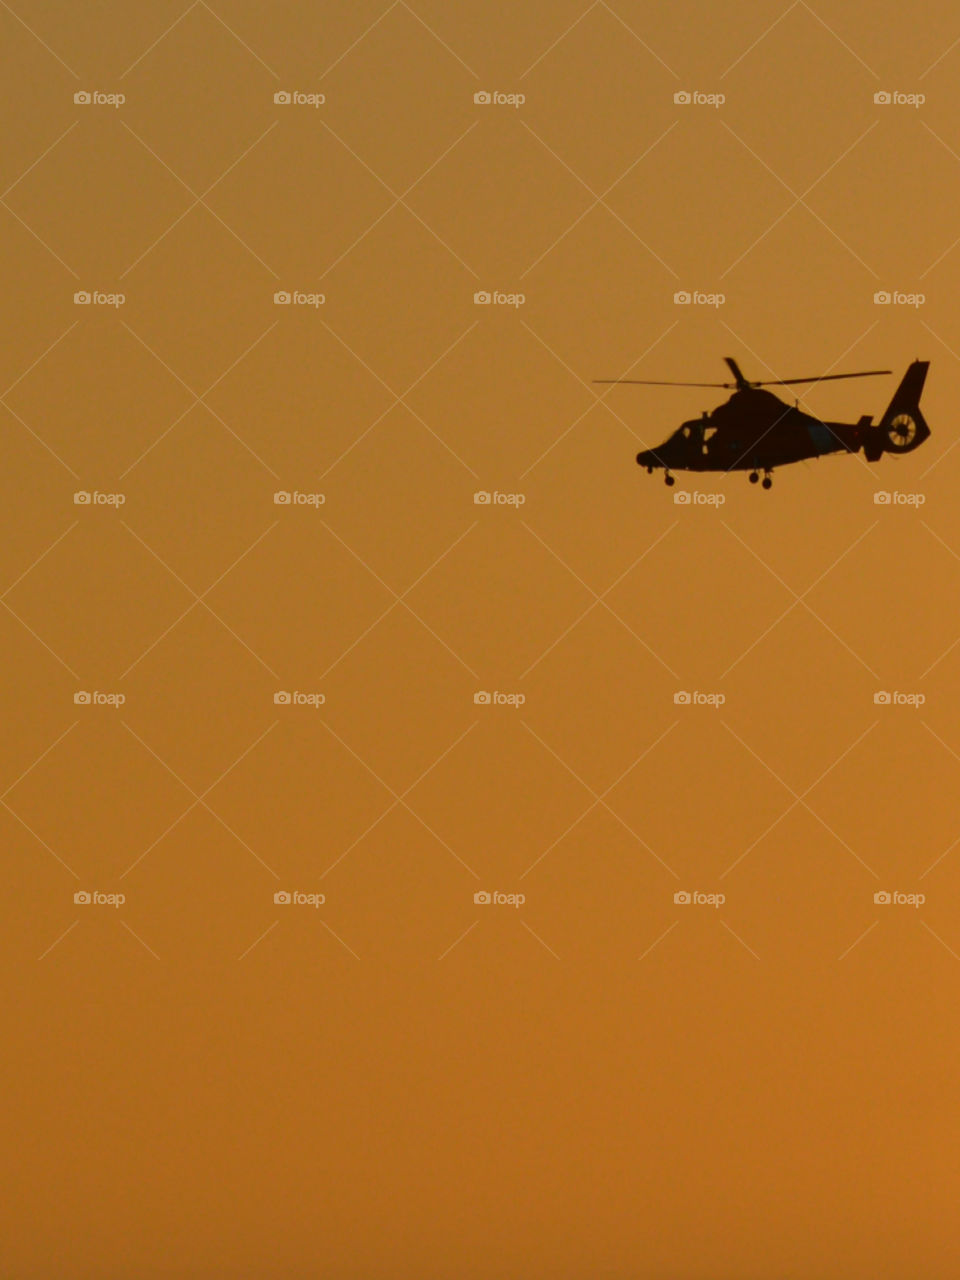 Silhouette of helicopter against sky